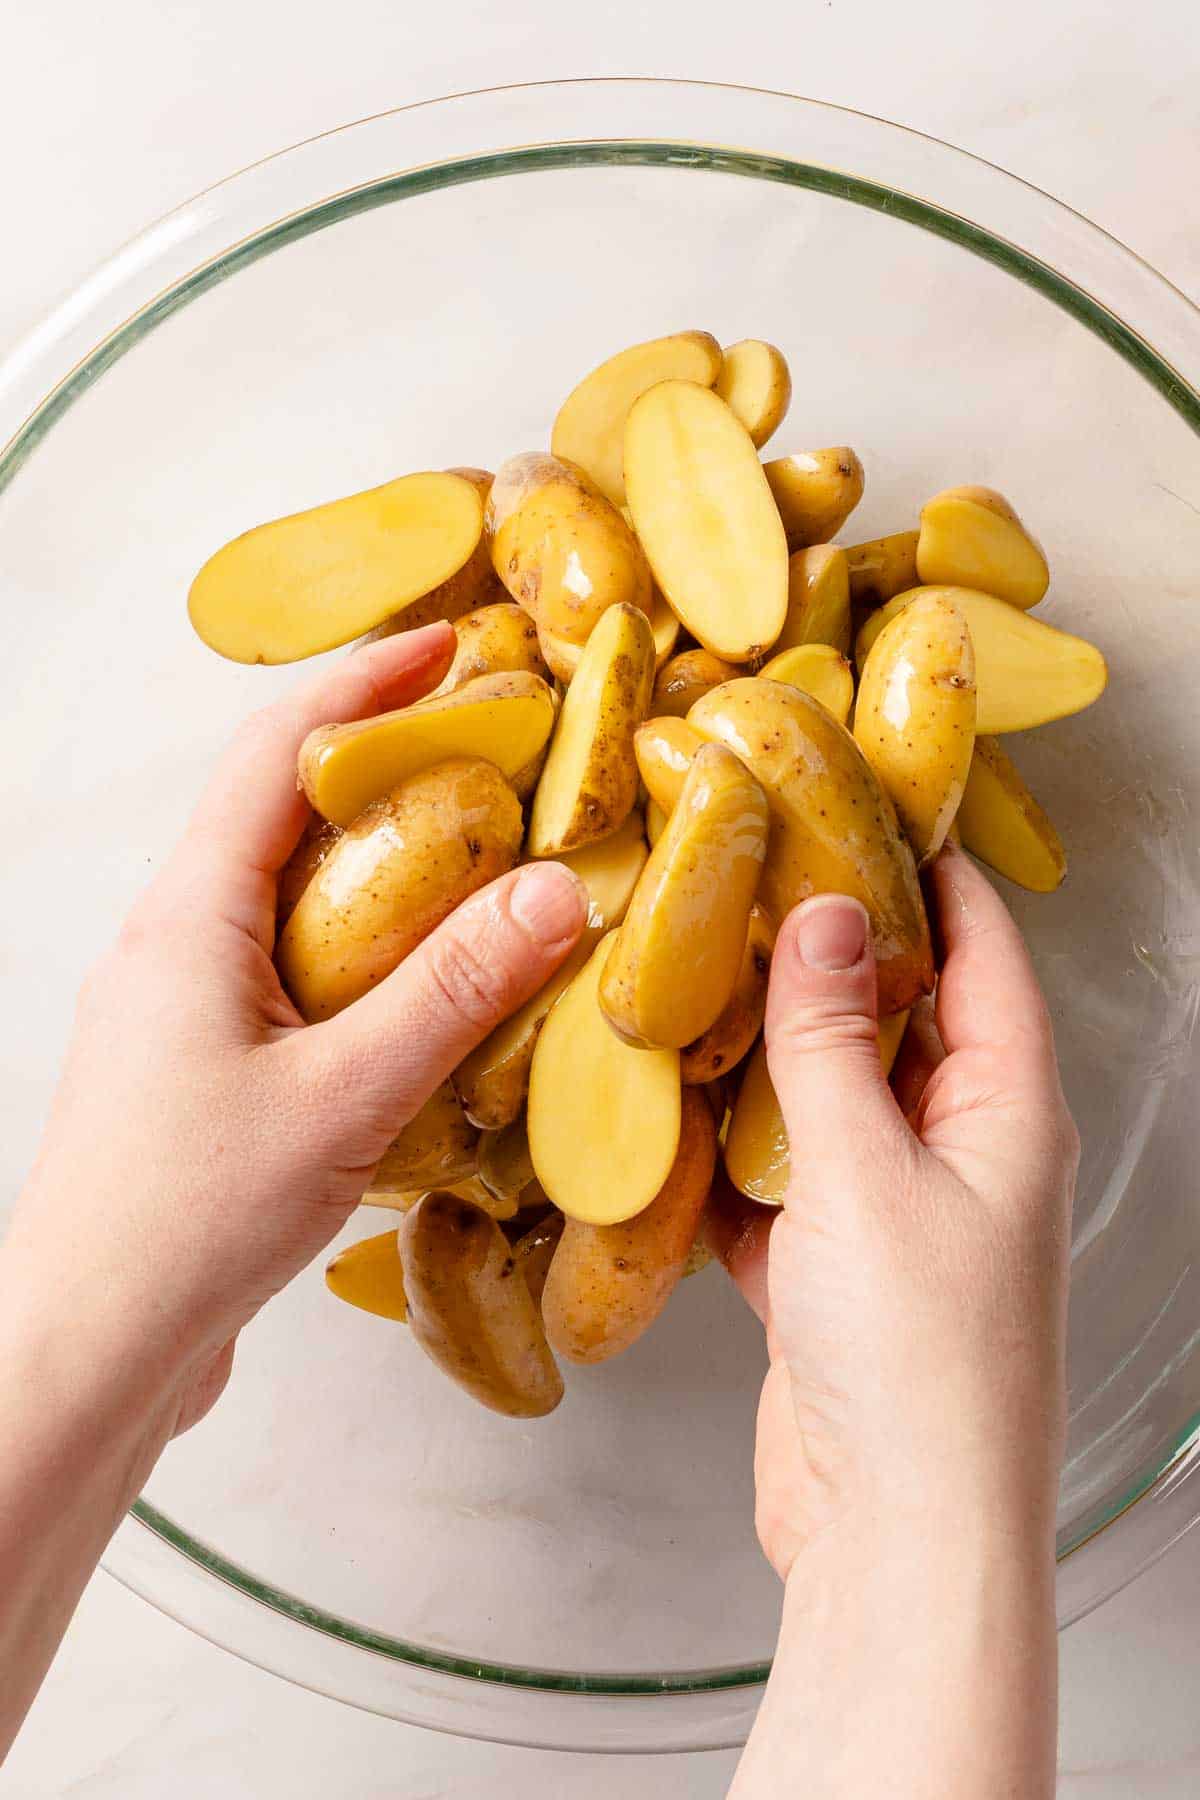 hands tossing cut fingerling potatoes with oil in bowl